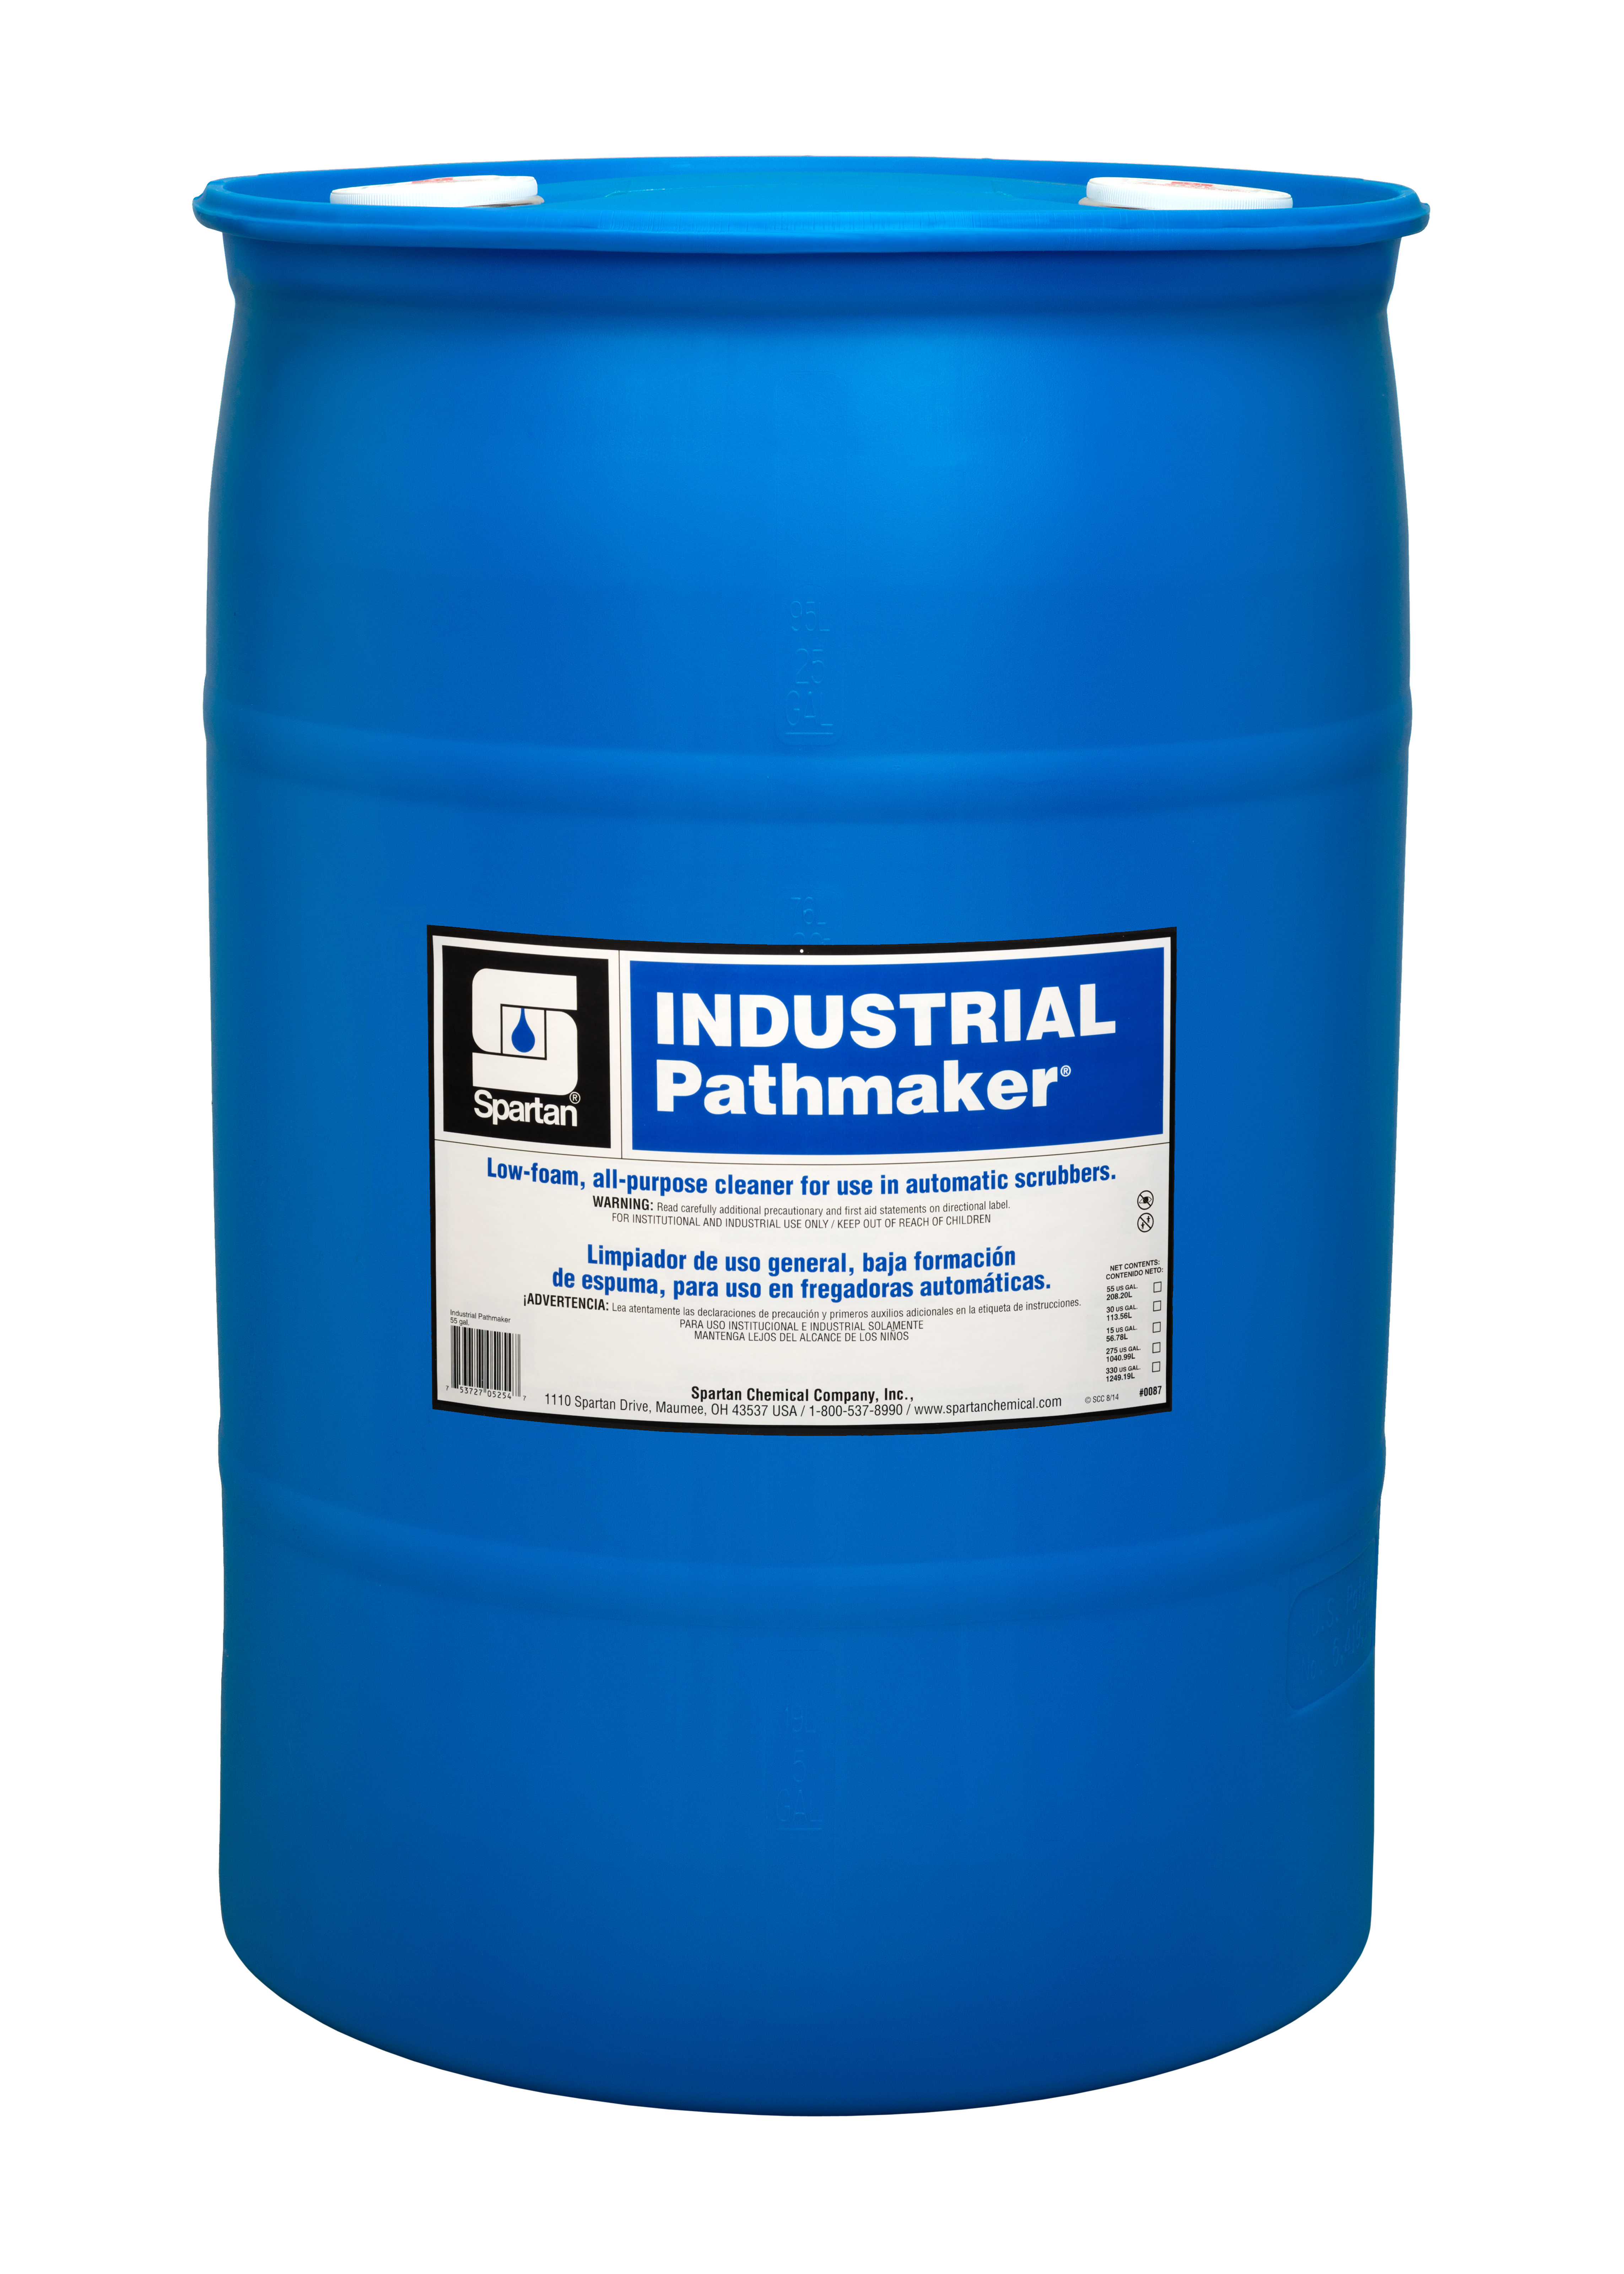 Spartan Chemical Company Industrial Pathmaker, 30 GAL DRUM